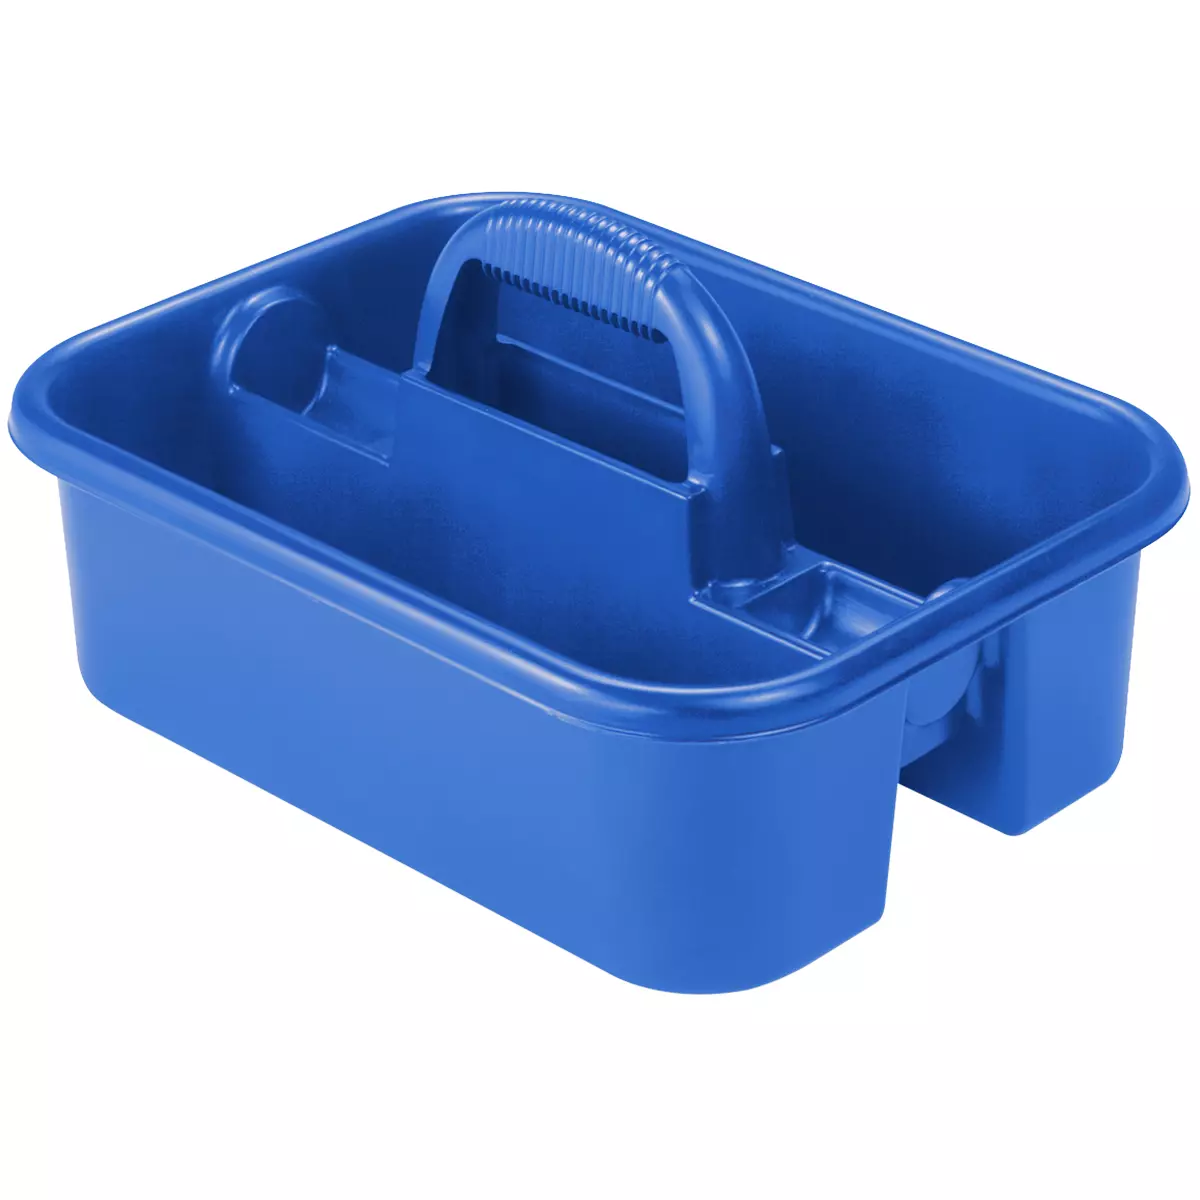 Tote Cleaning Caddy with Dividers for Cleaning Supplies, Cleaning